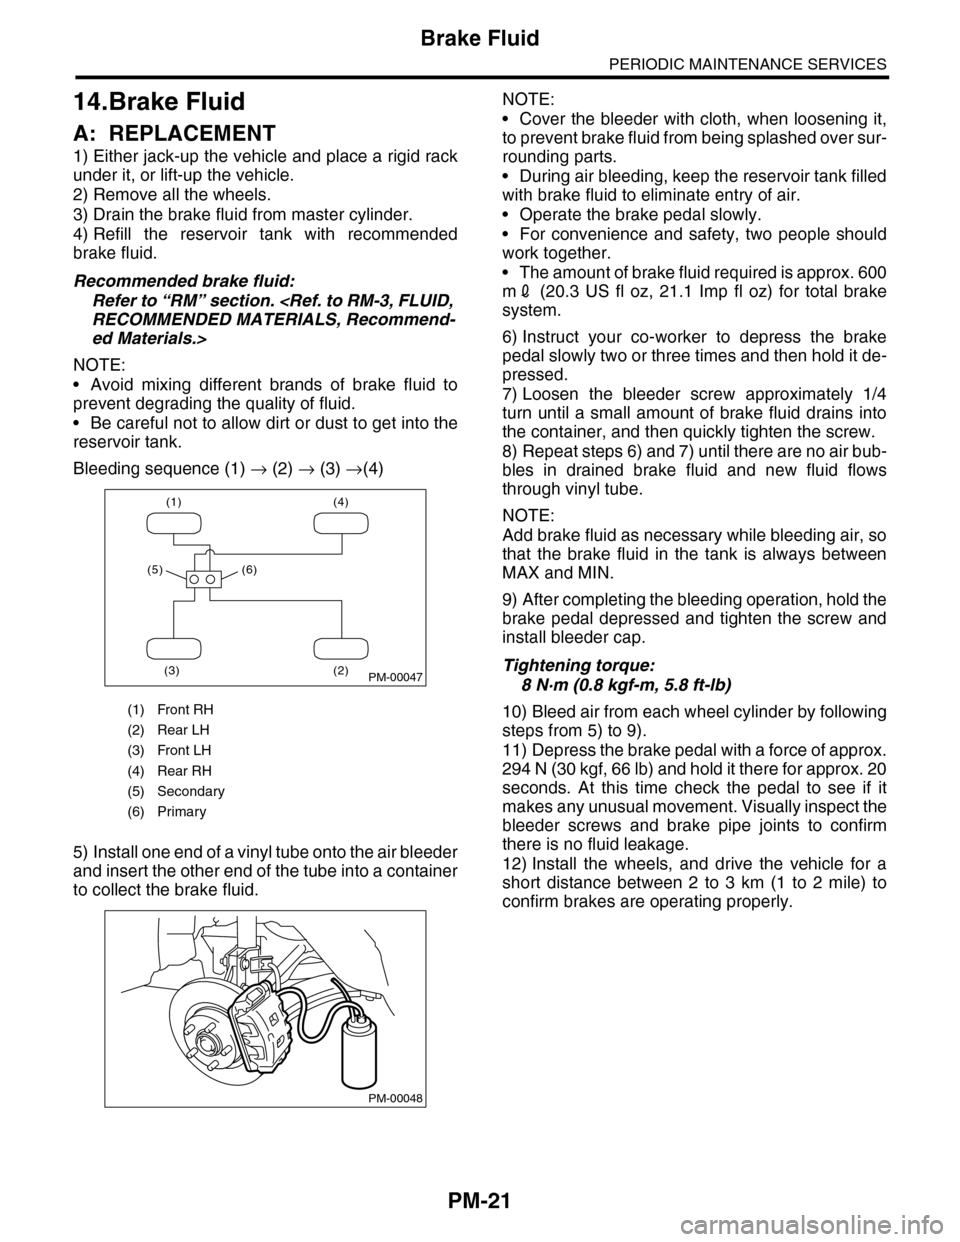 SUBARU TRIBECA 2009 1.G Service Workshop Manual PM-21
Brake Fluid
PERIODIC MAINTENANCE SERVICES
14.Brake Fluid
A: REPLACEMENT
1) Either jack-up the vehicle and place a rigid rack
under it, or lift-up the vehicle.
2) Remove all the wheels.
3) Drain 